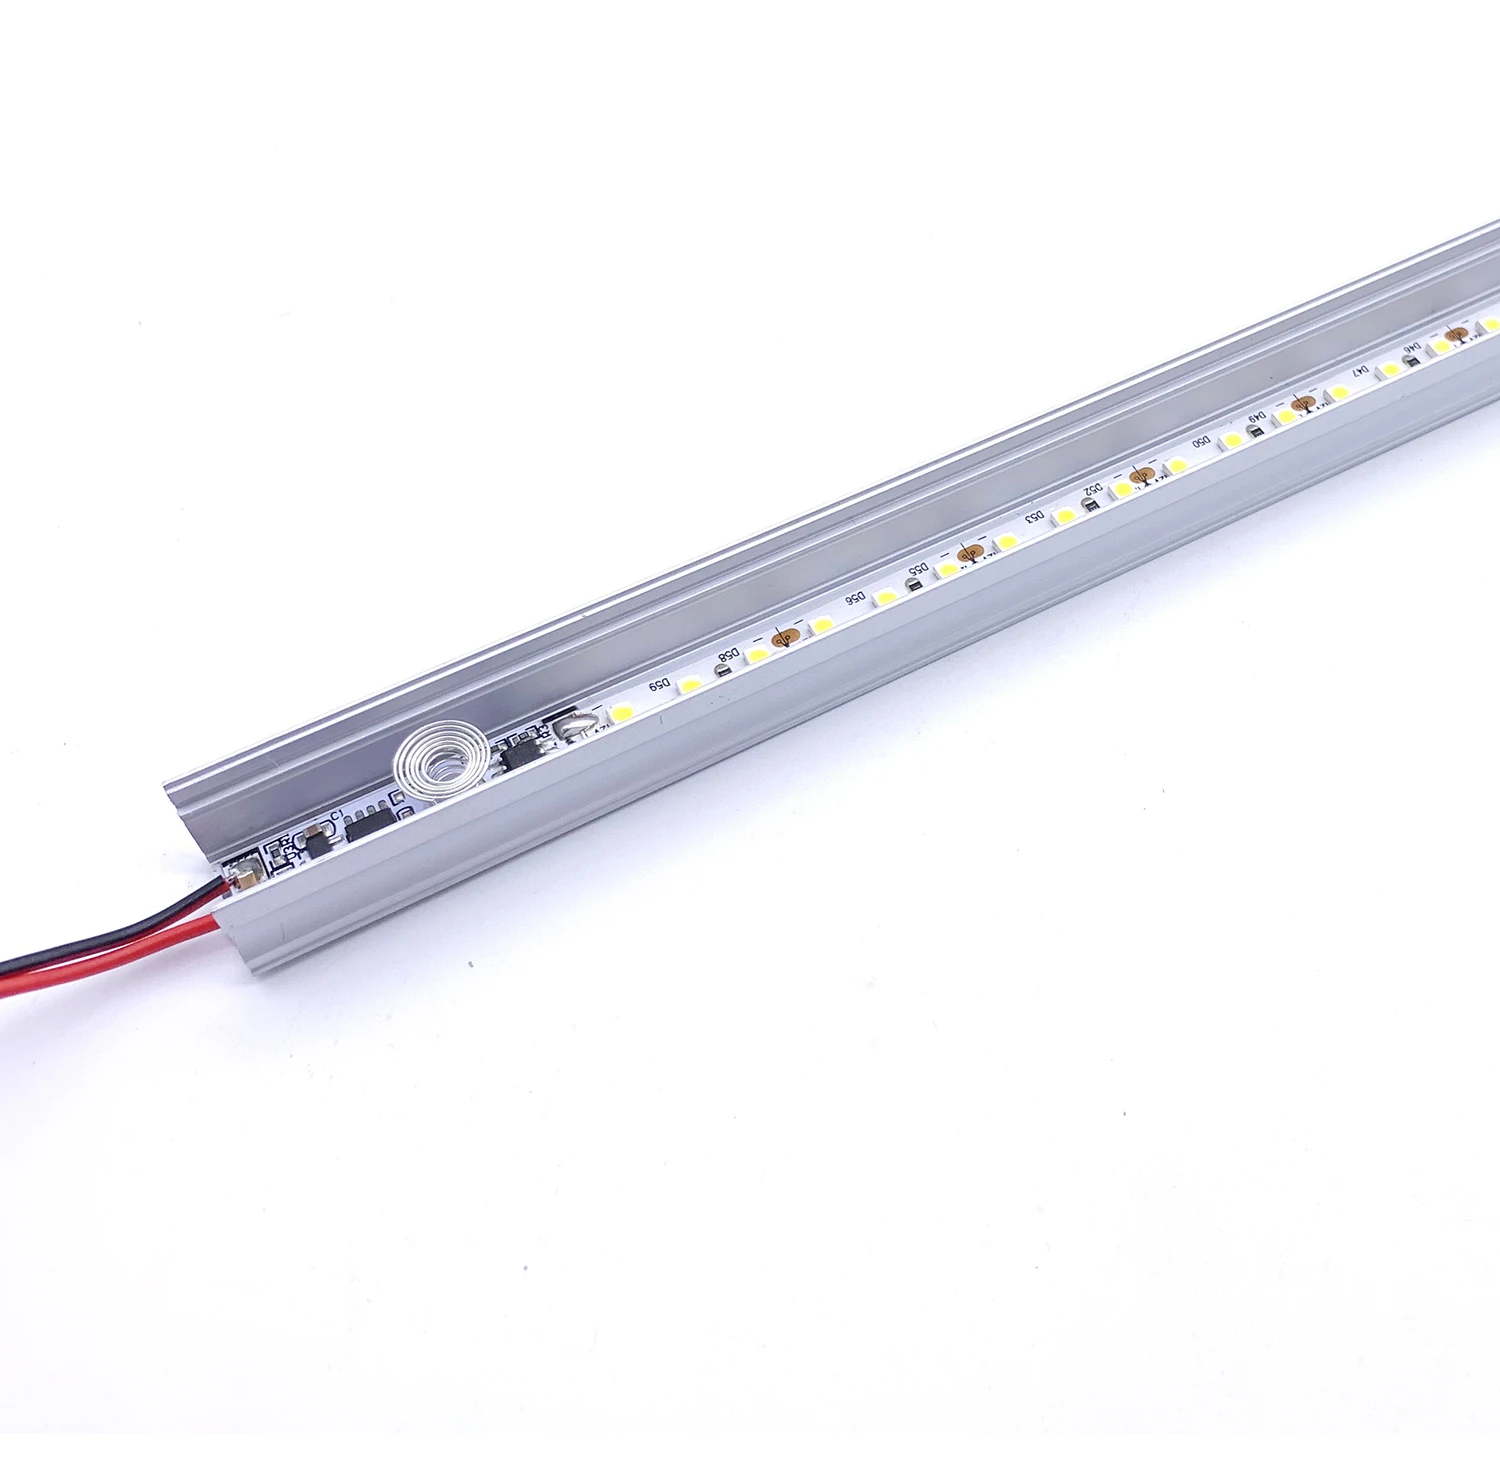 Aluminum profile LED cabinet light with hand scan switch ON OFF sensor